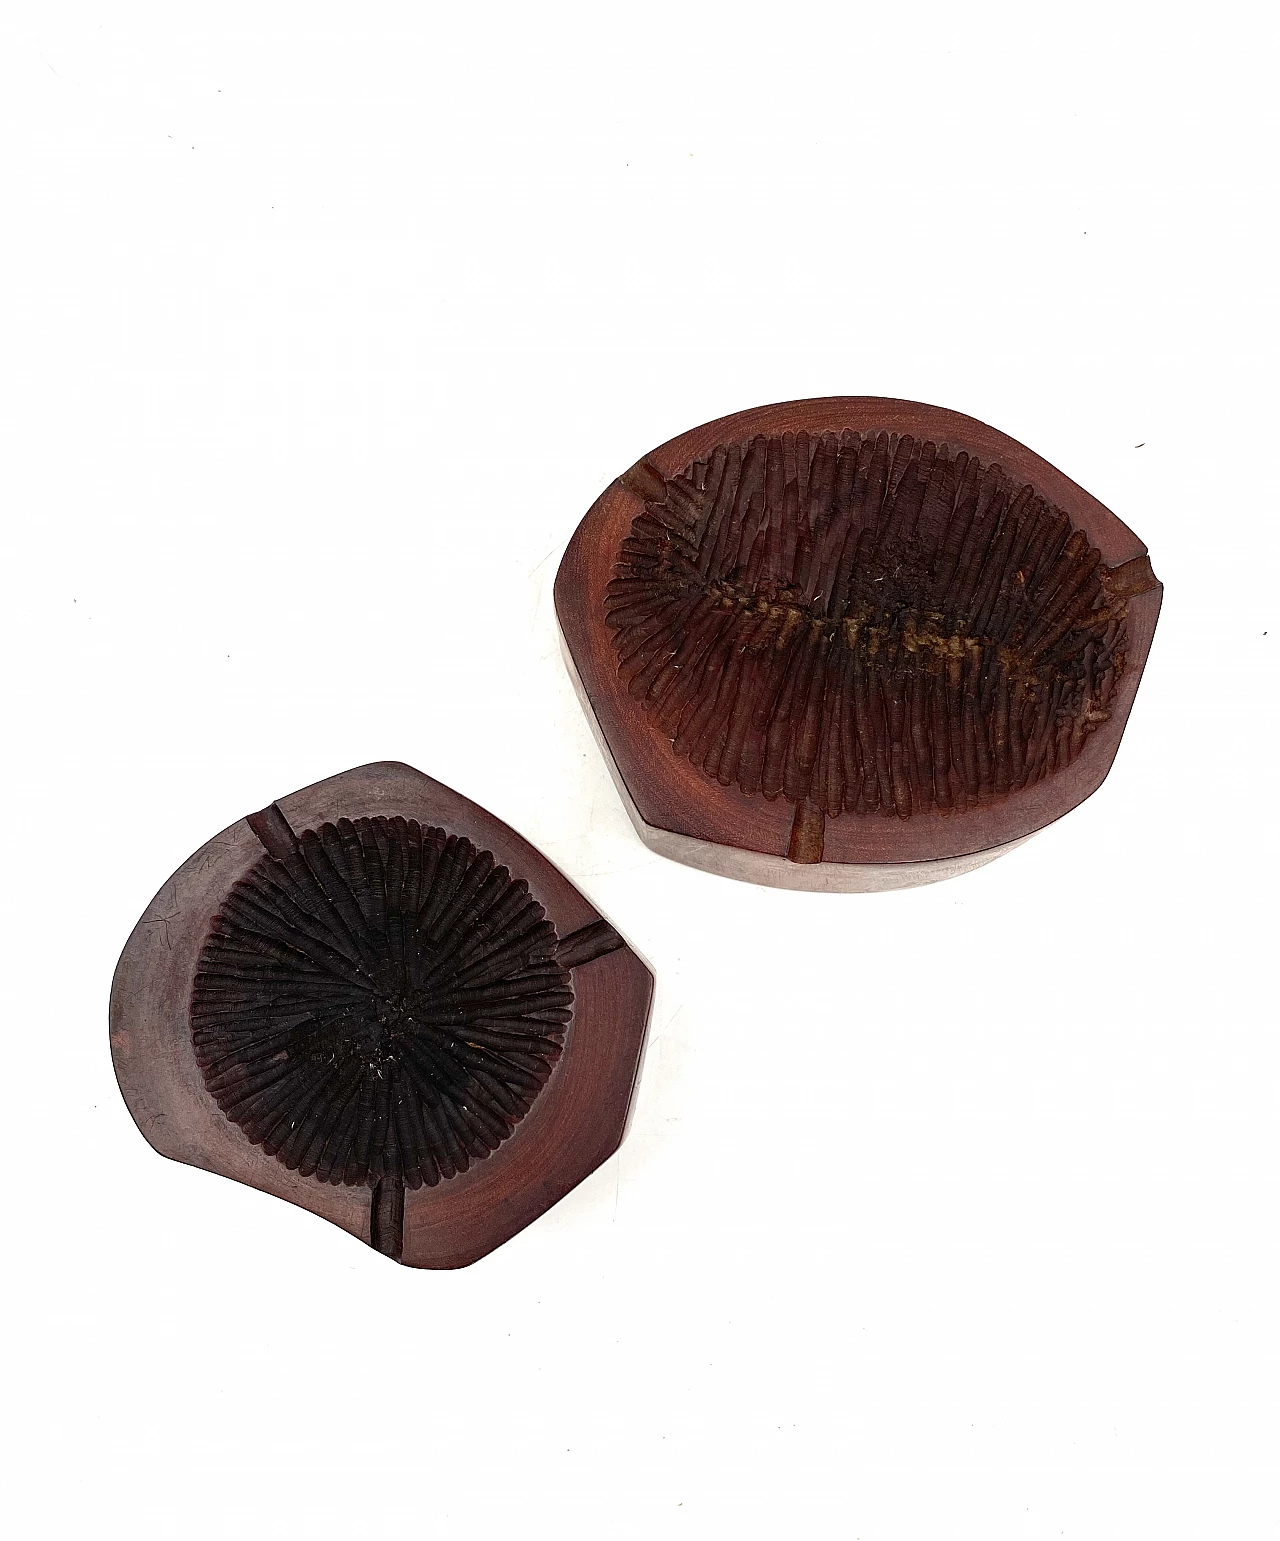 Pair of wooden ashtrays in Monique Gerber's style, 1970s 7